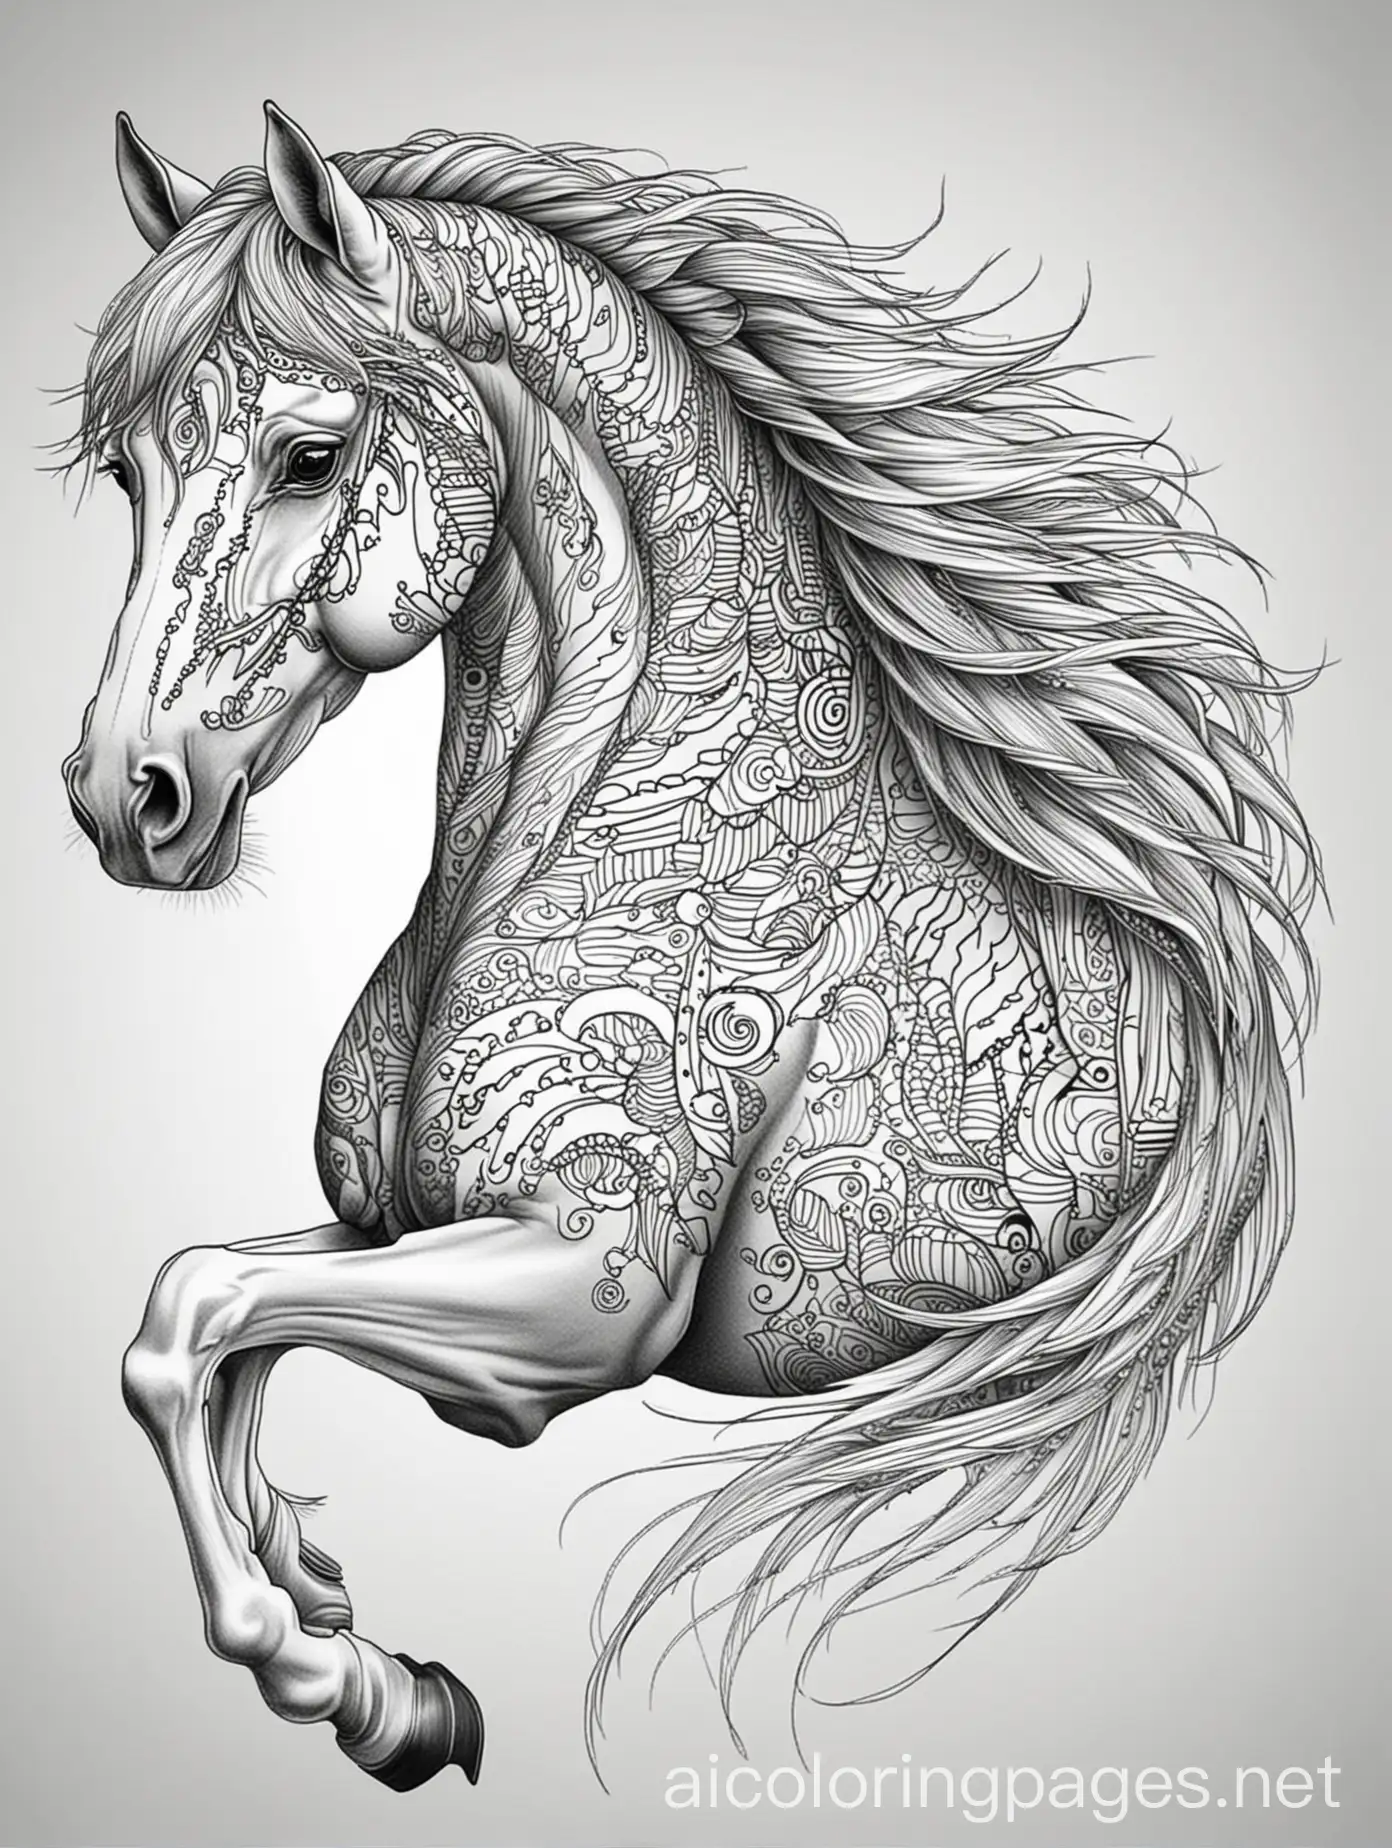 Intricate-Black-Line-Art-Horse-for-Adult-Coloring-Book